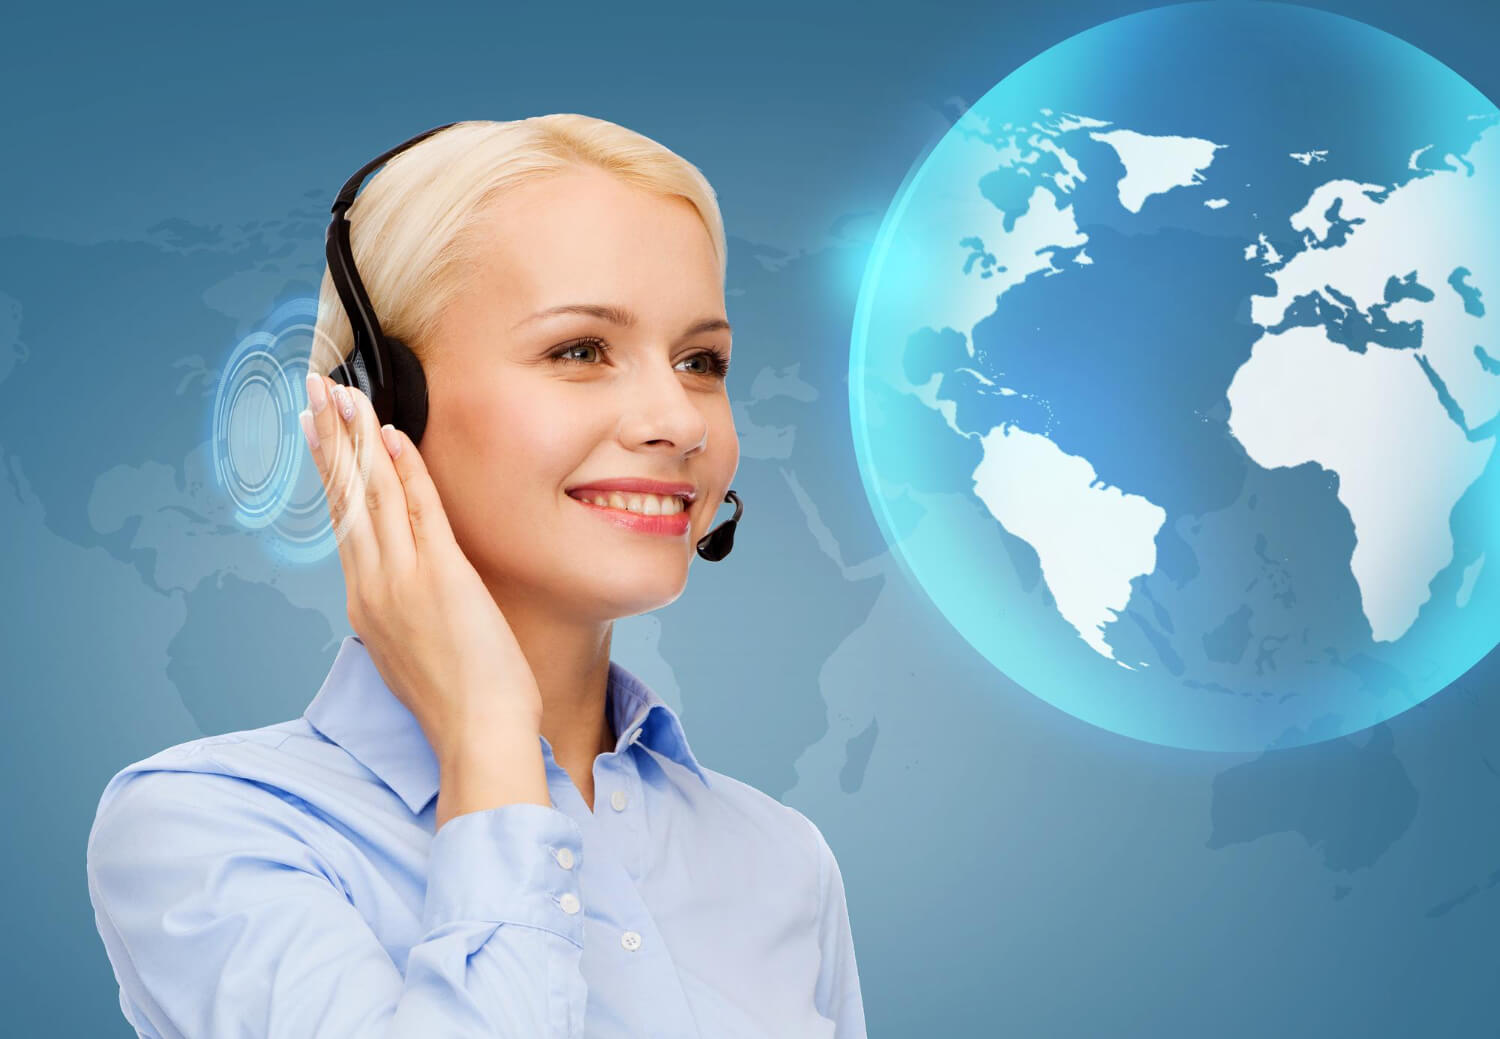 A smiling female customer service representative provides strategically-positioned call center services via a headphone; the picture shows a background that includes globe, demonstrating that regionally-placed call centers can support global business expansion.